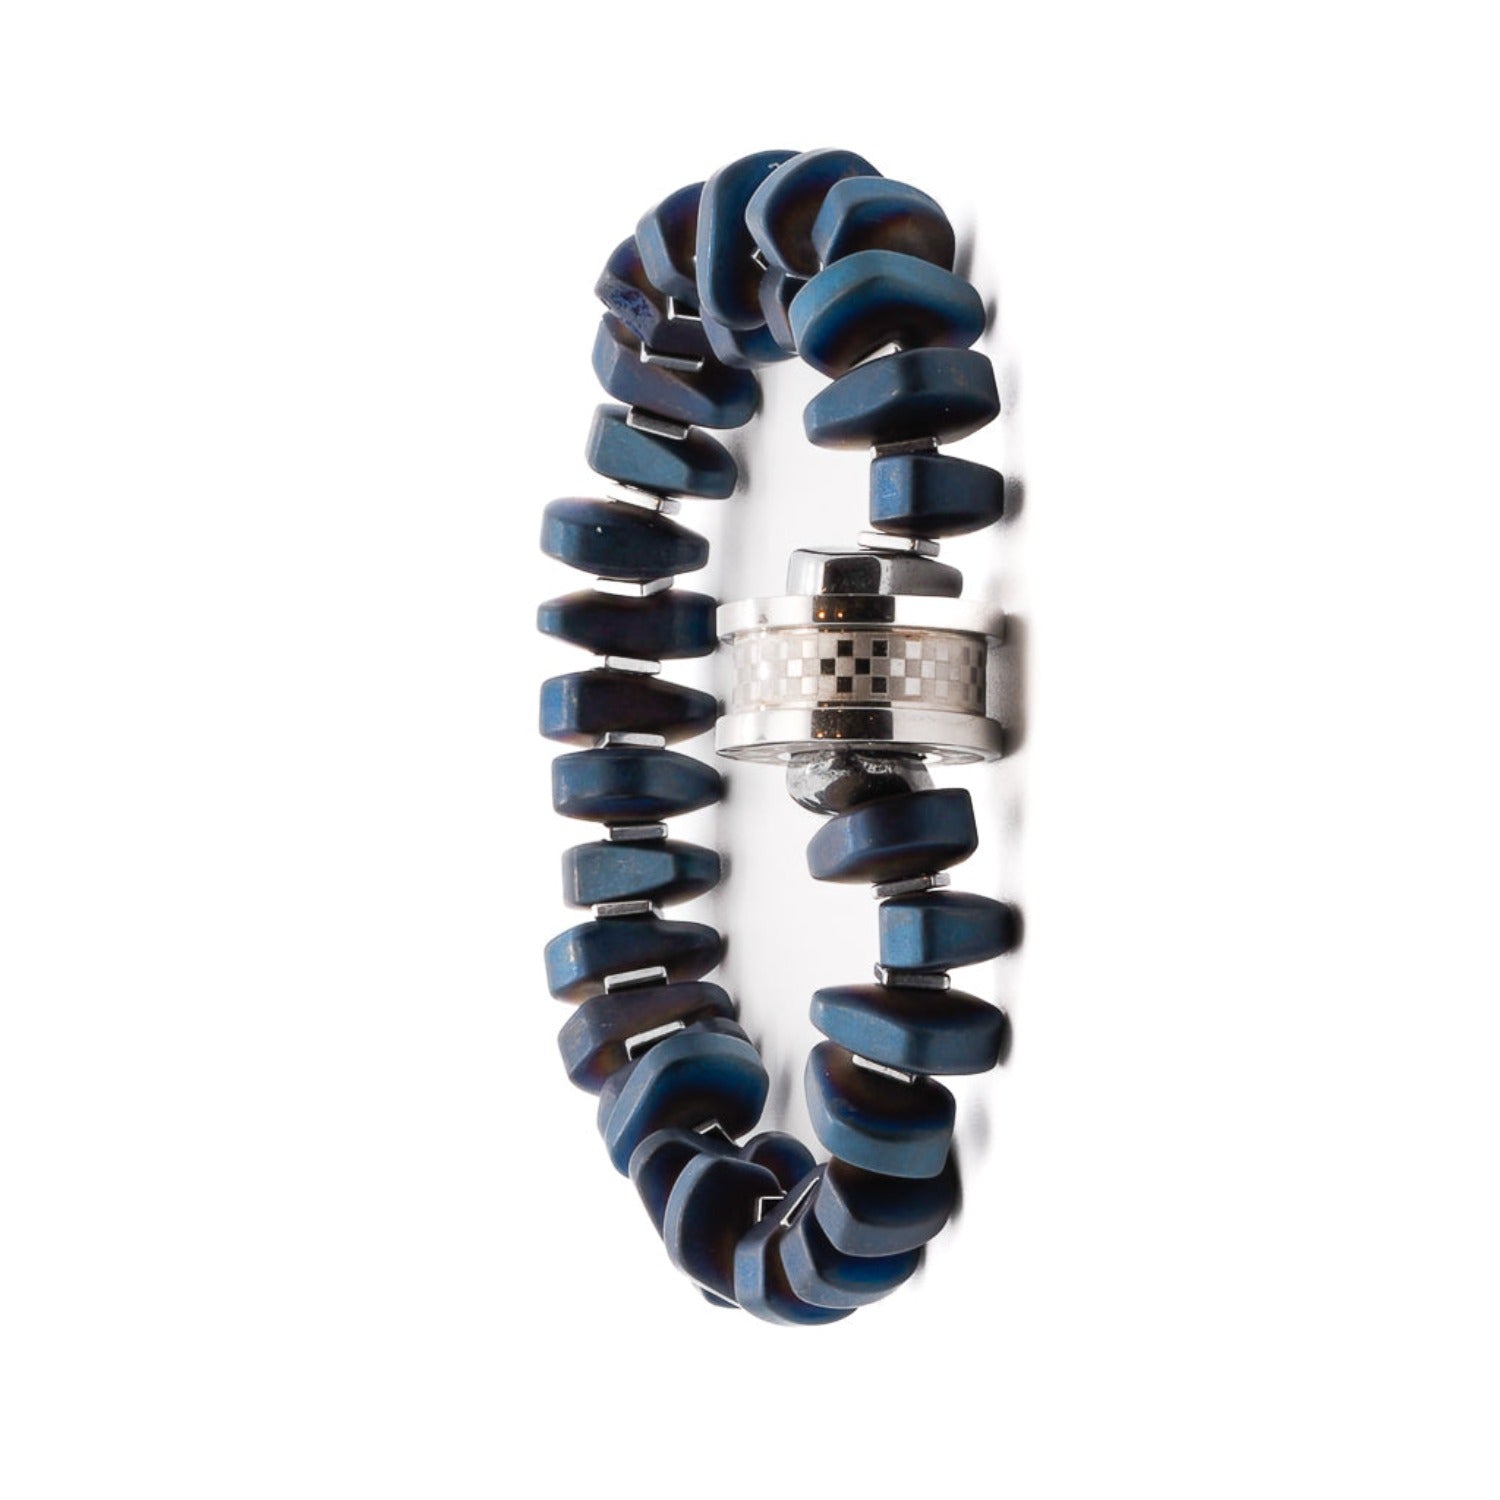 The Blue Amour Men Bracelet, a fashionable accessory that complements any look